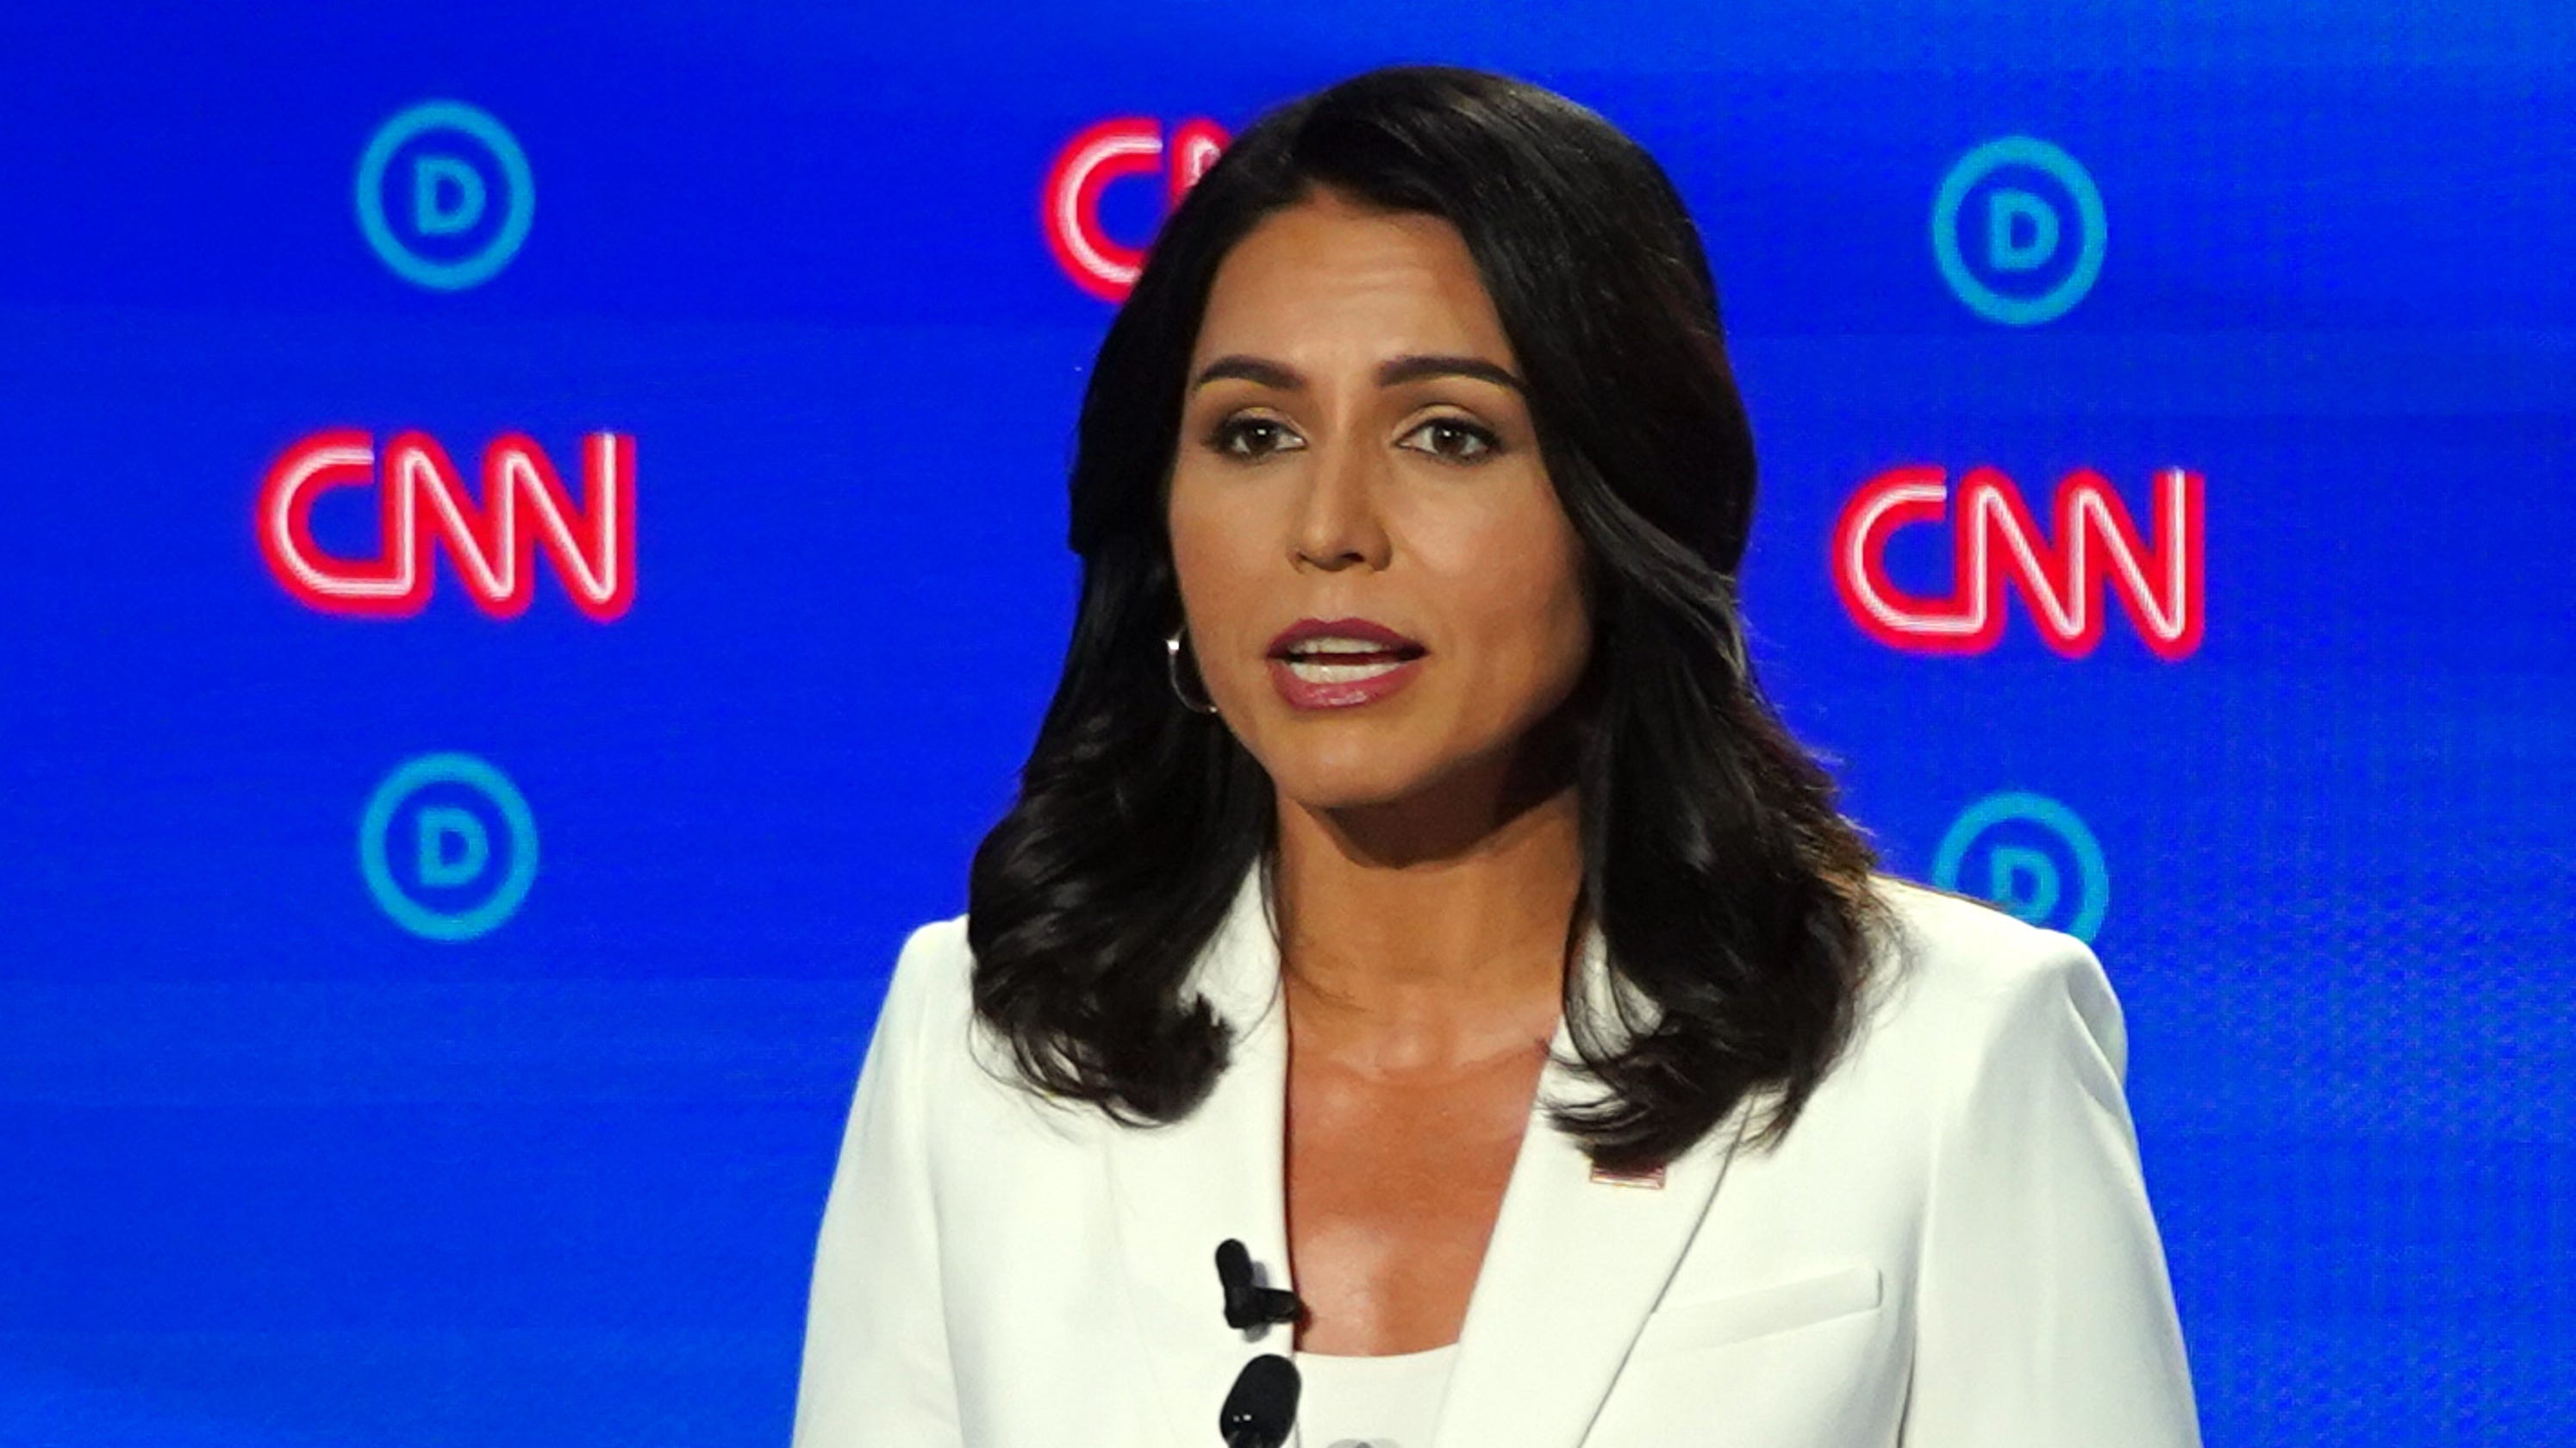 Democratic Debate: Tulsi Gabbard is once again most searched candidate